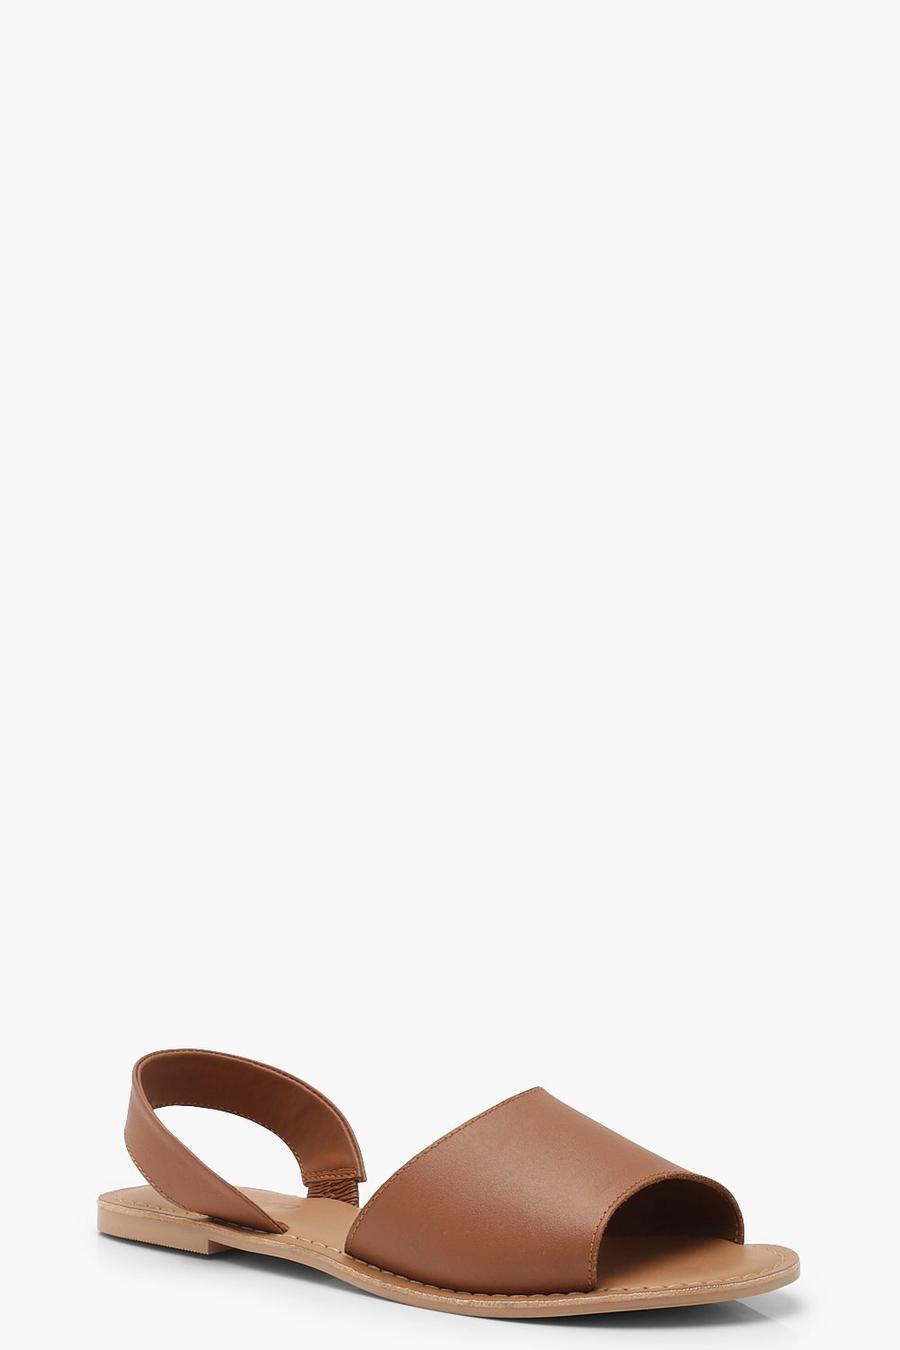 Tan Wide Fit 2 Part Peeptoe Leather Sandals image number 1